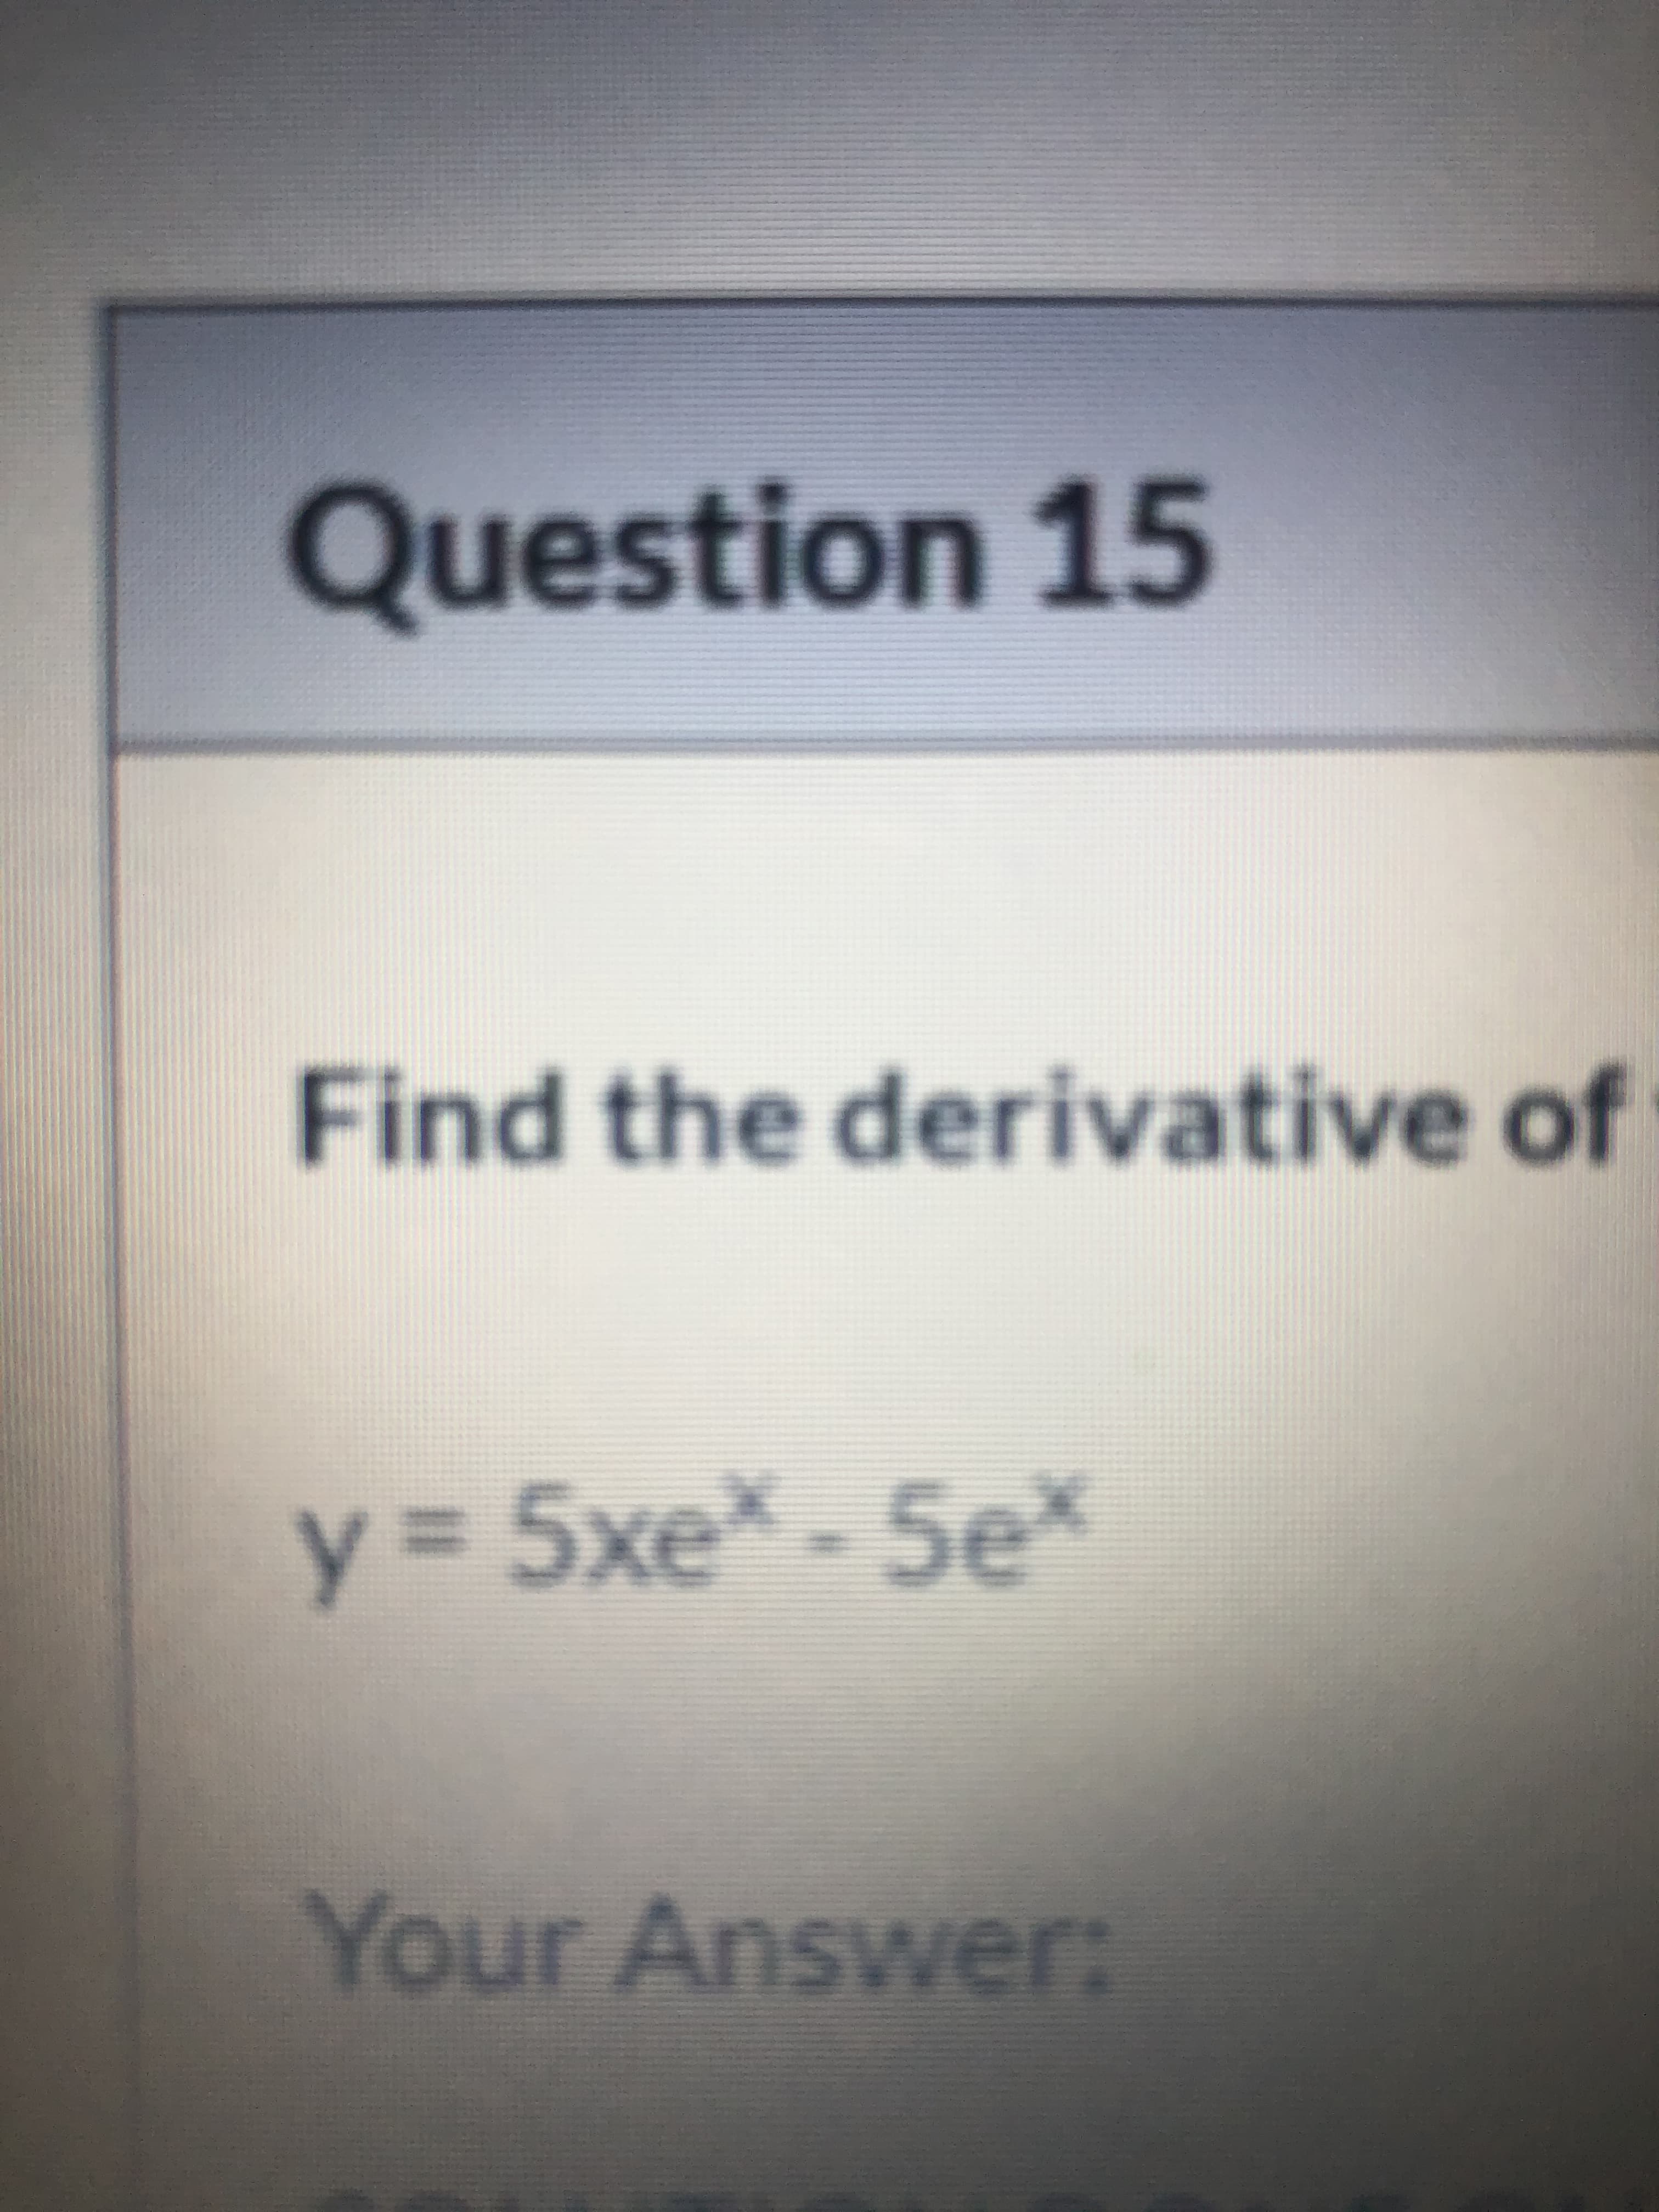 d the derivative of
5xe -5ex
